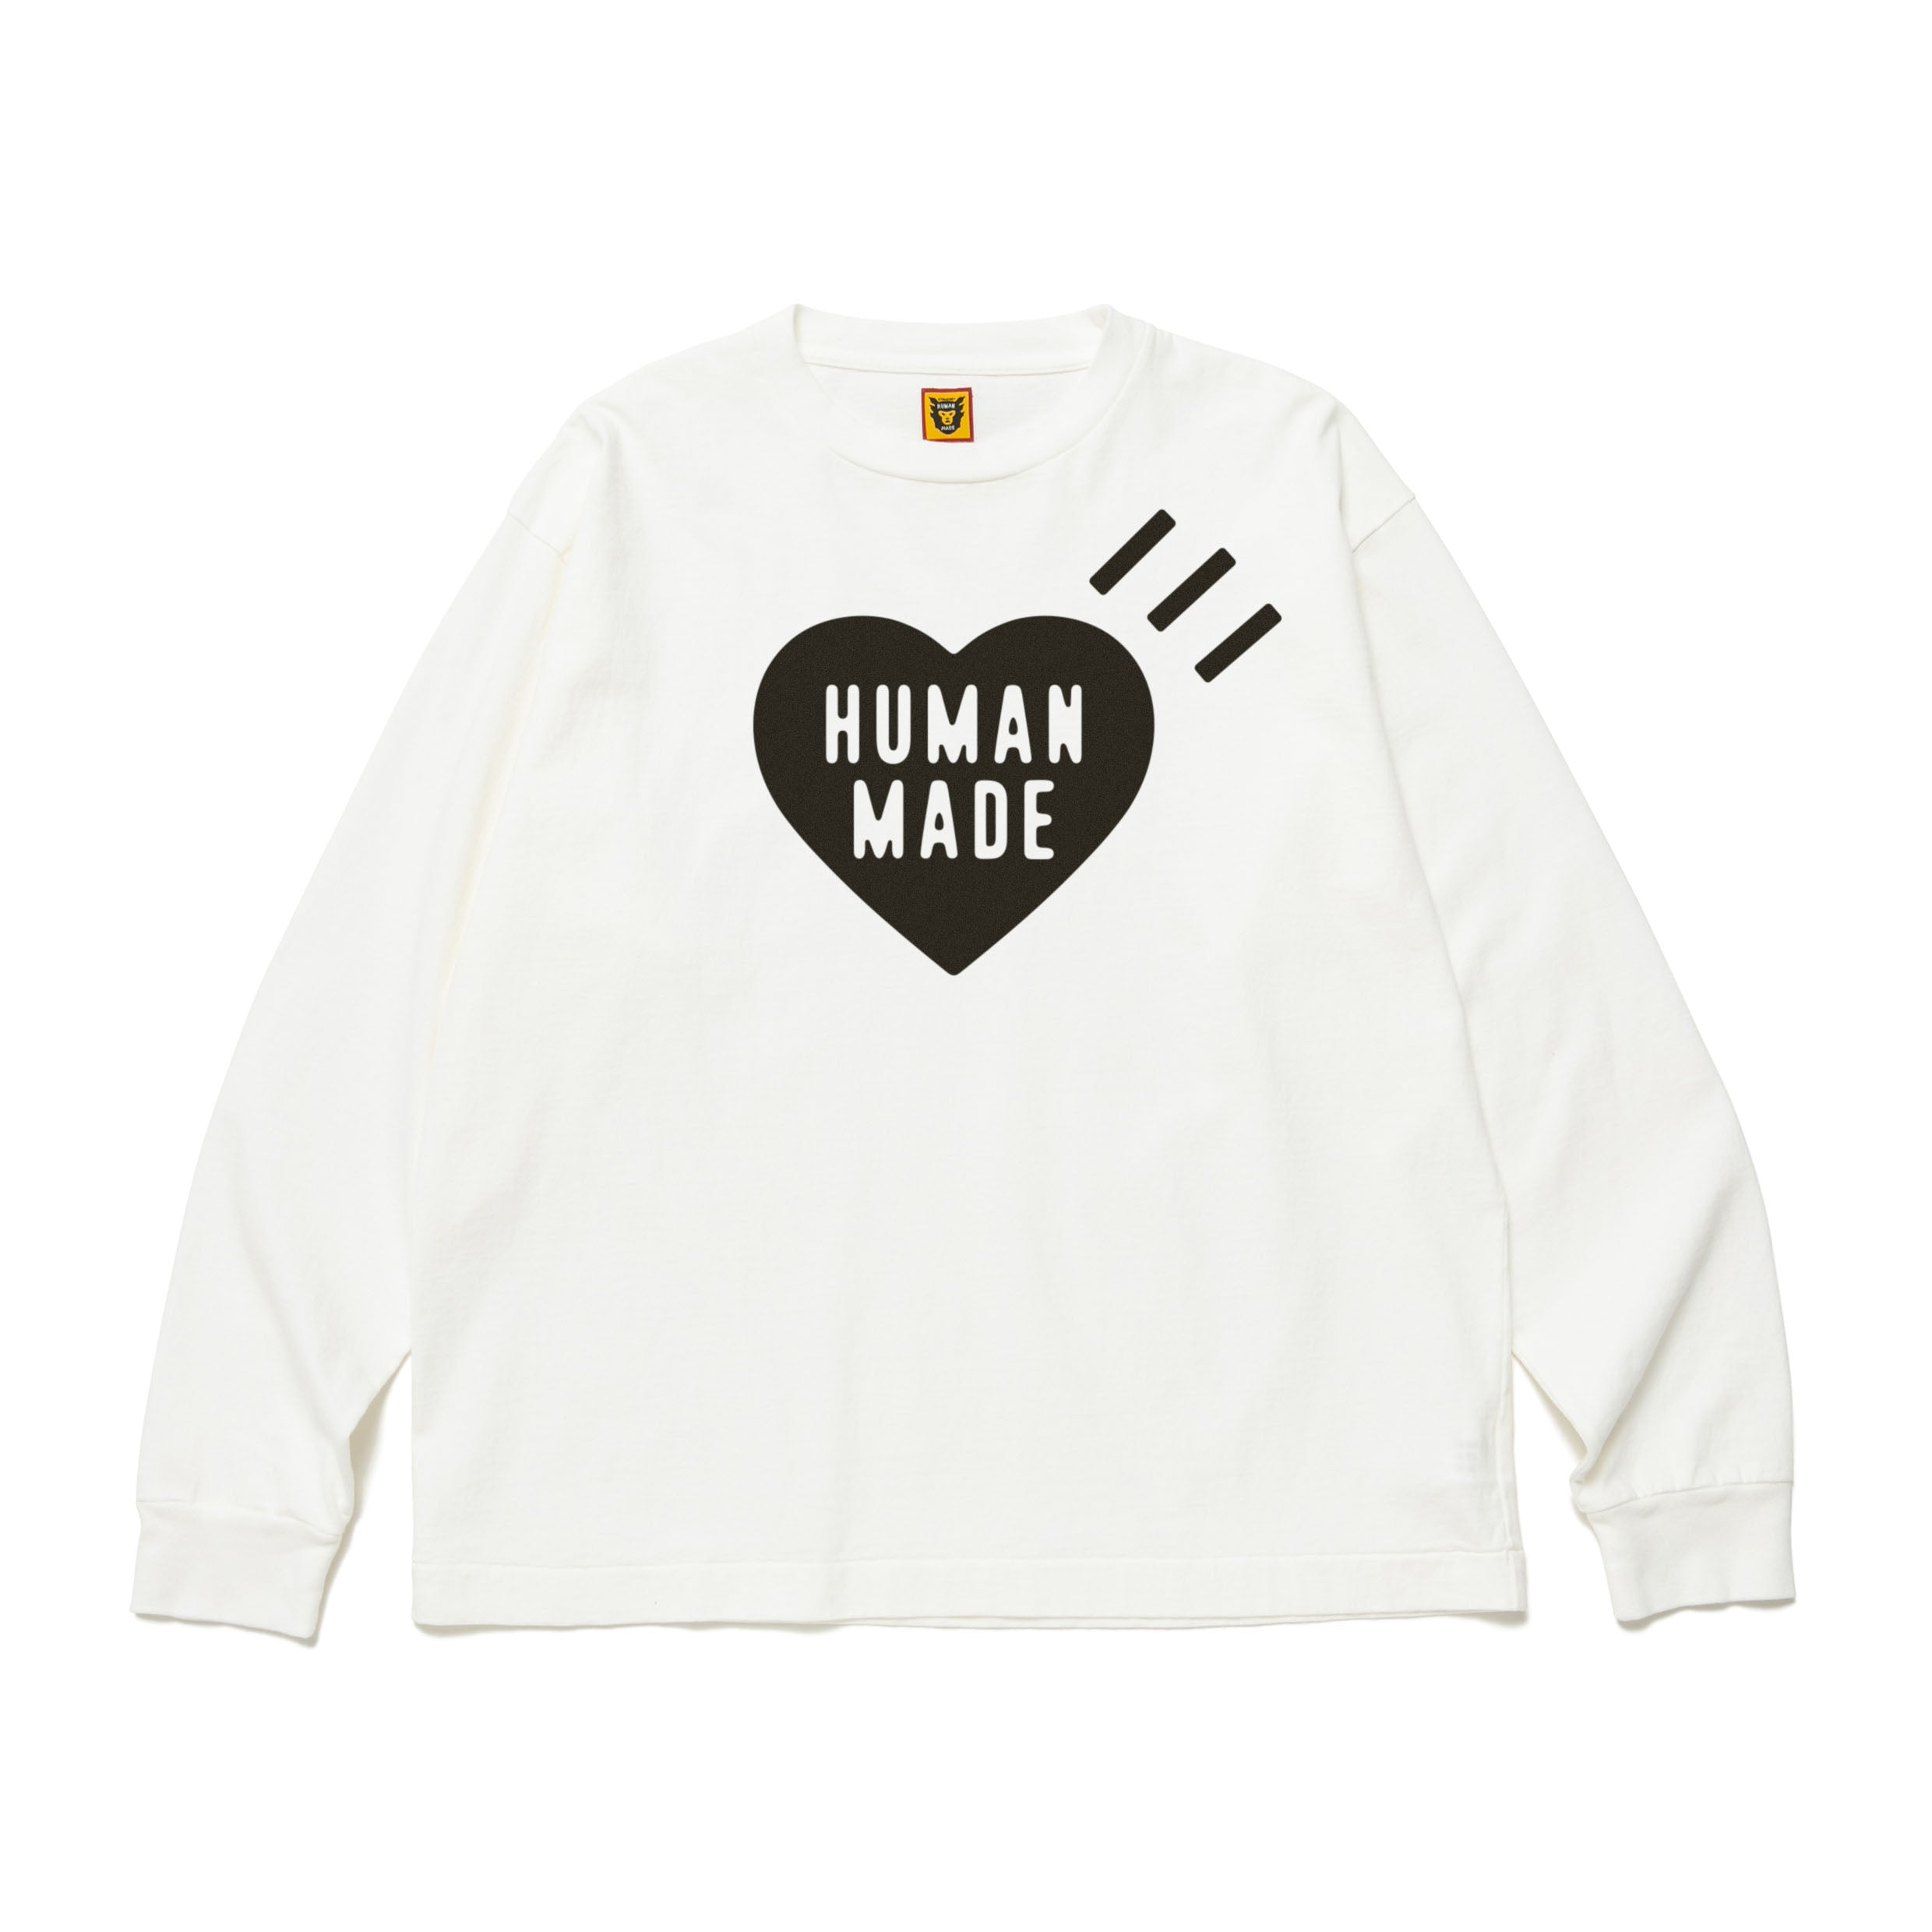 DAILY L/S T-SHIRT #261117 – HUMAN MADE ONLINE STORE